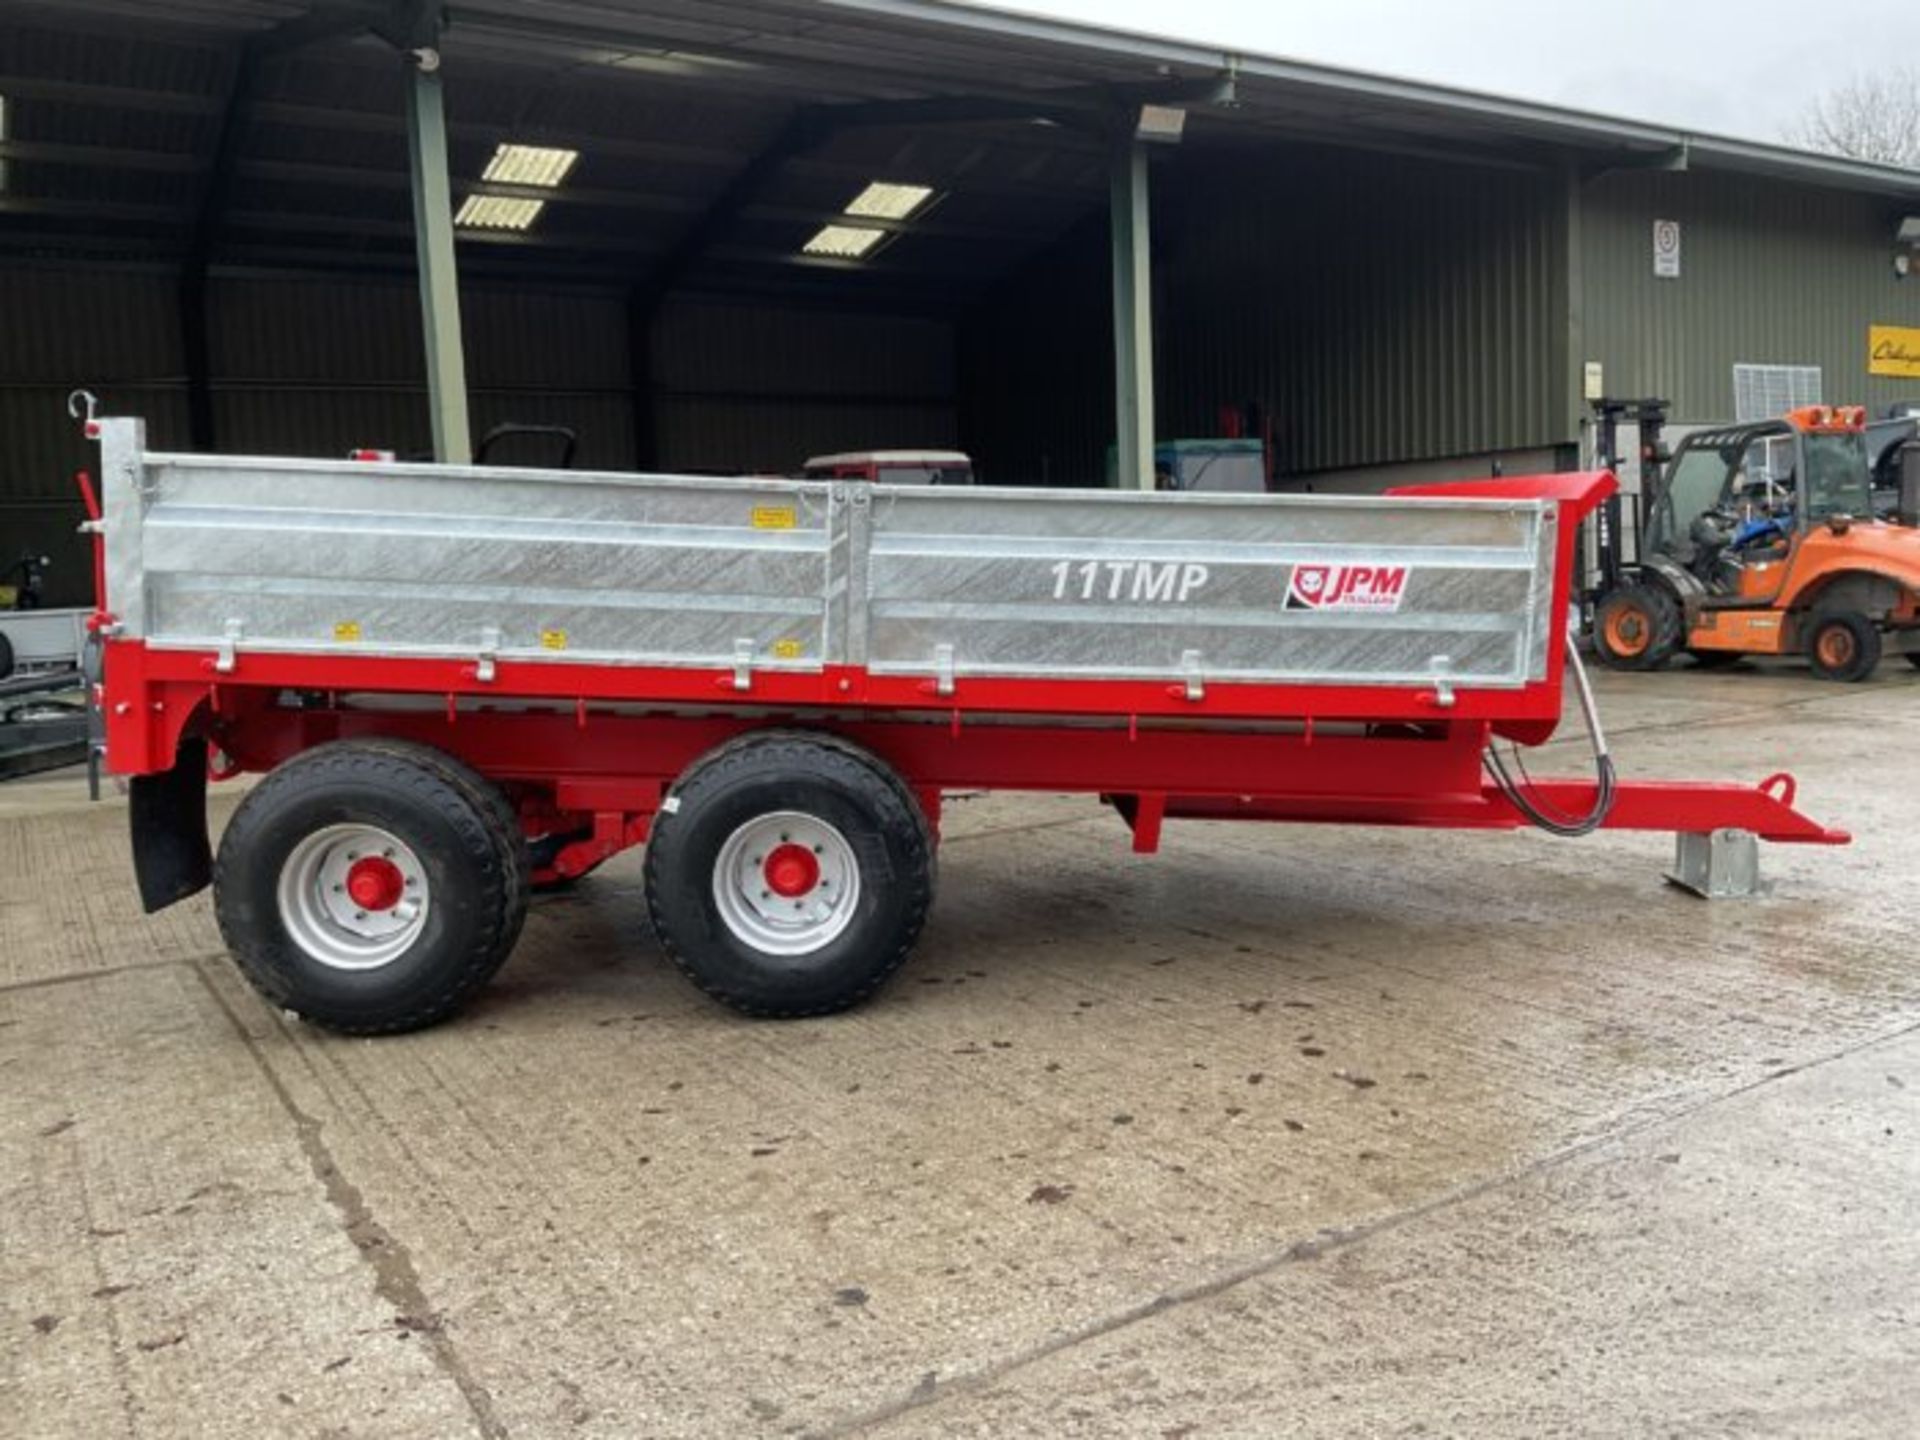 JPM 11 TMP. 11 TONNE MULTI PURPOSE TRAILER. DROP SIDE. WITH RAMPS. - Image 5 of 8